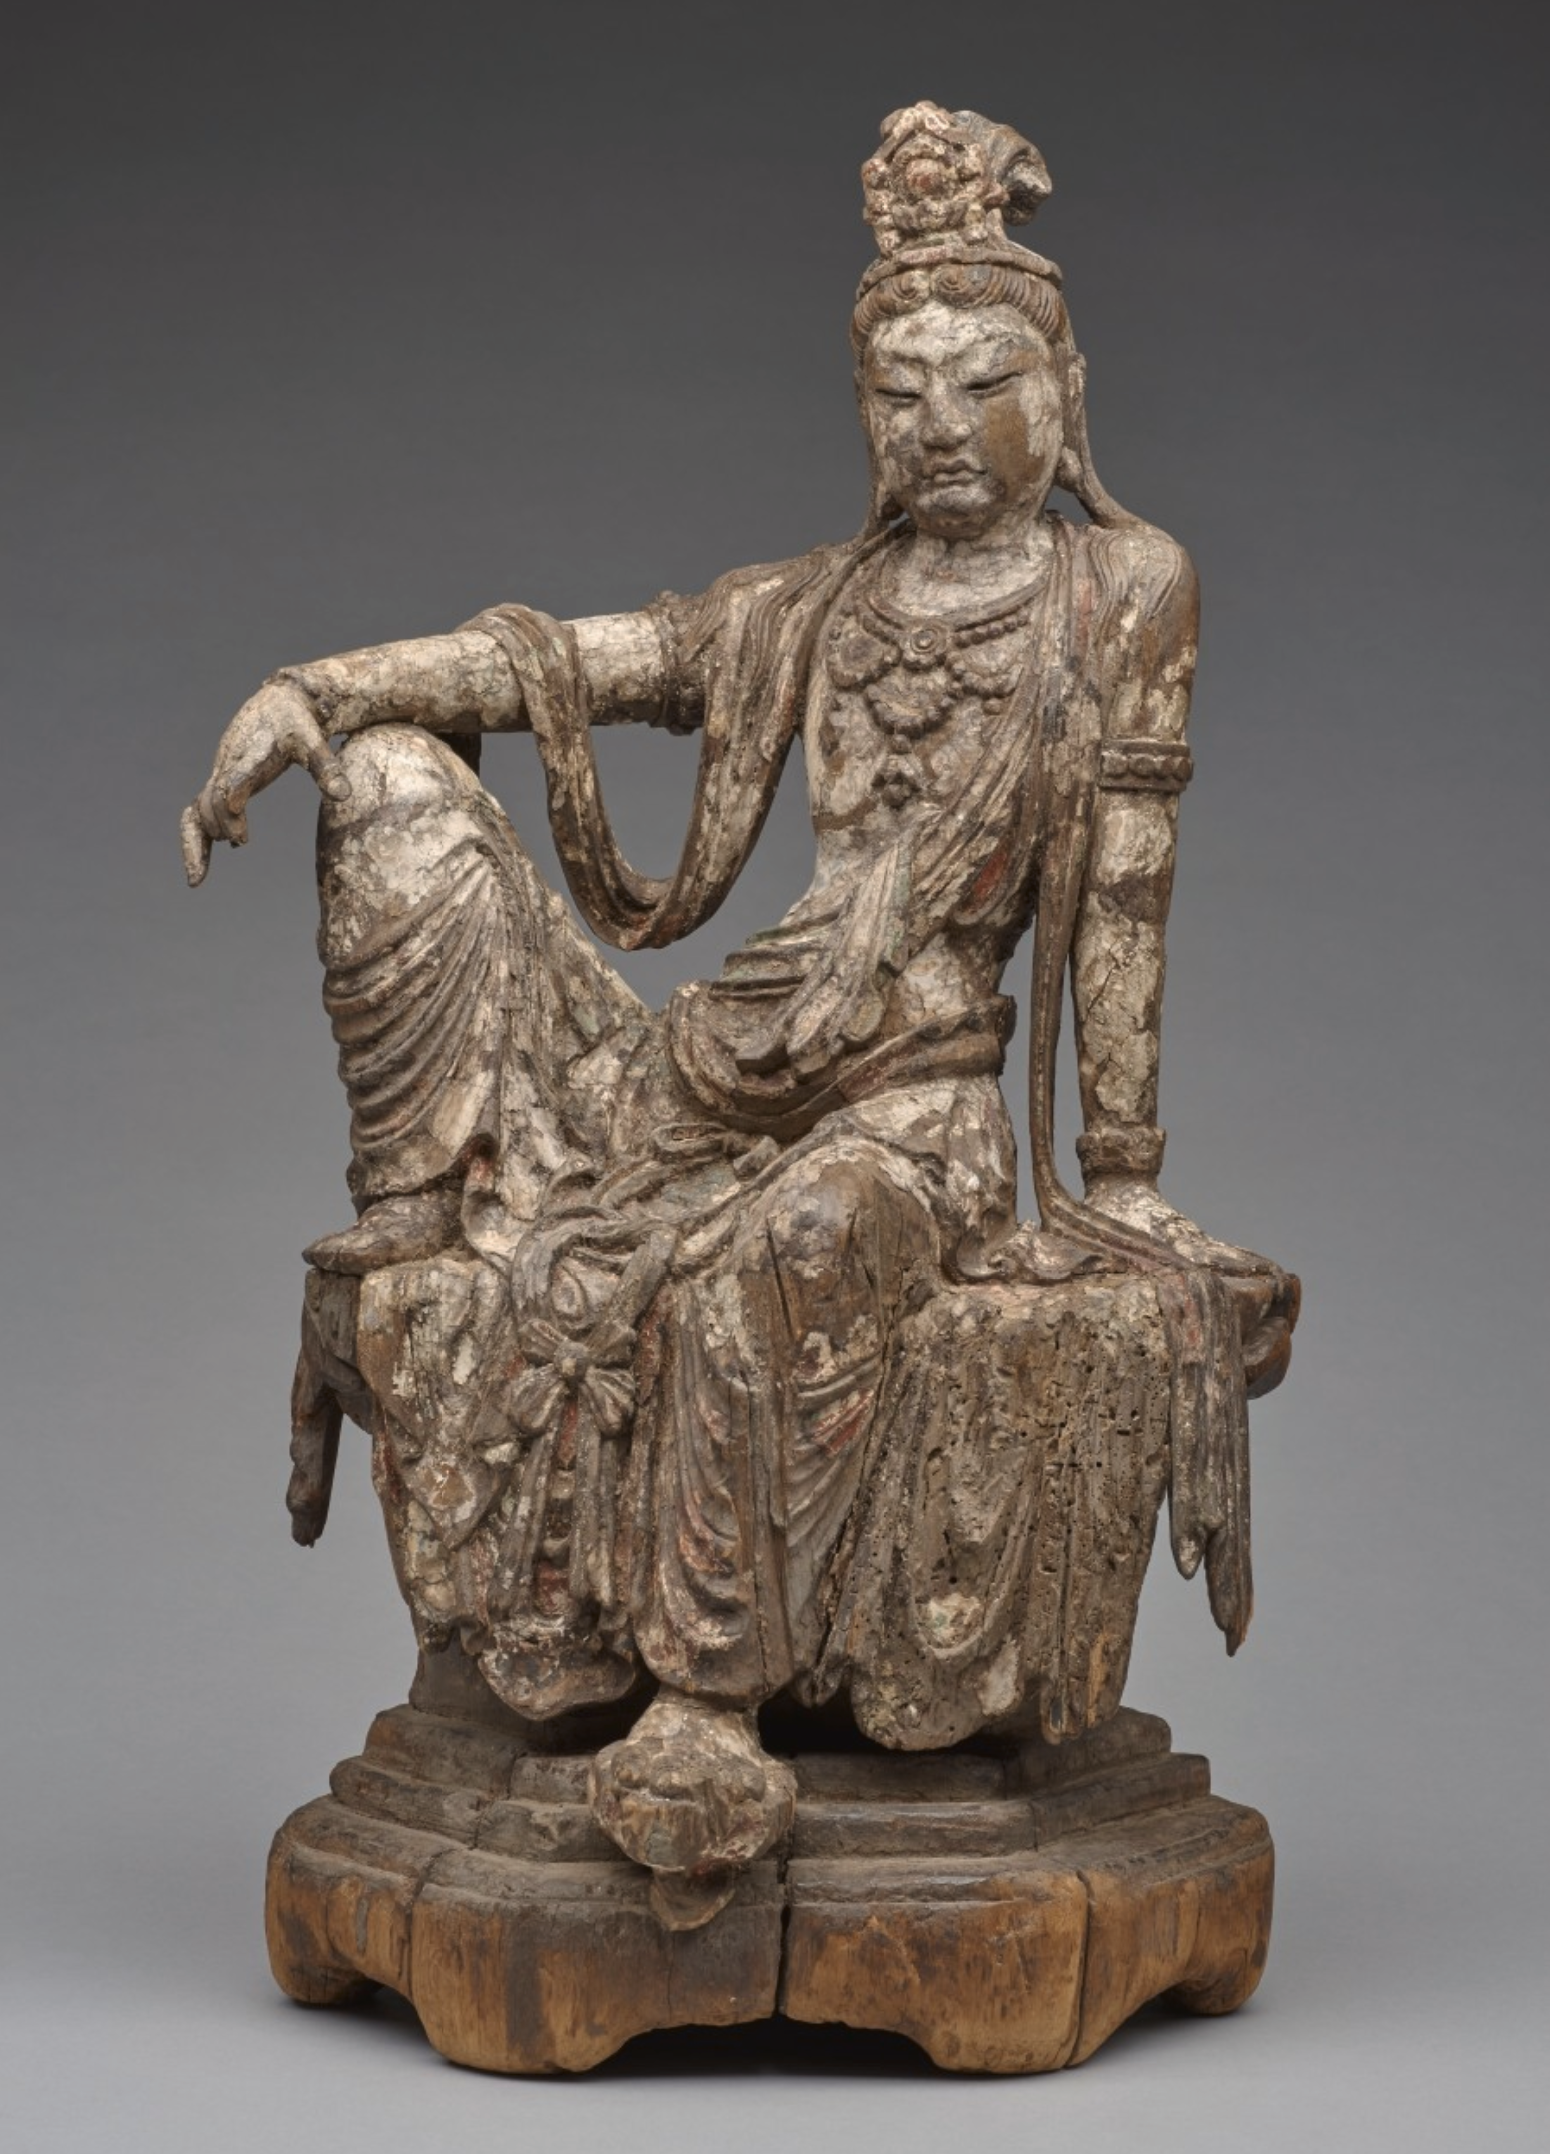 Bodhisattva of Compassion (Guanyin) Seated in Royal Ease, 900s (China), Polychromed Wood, 43.18 x 22.86 x 20.32 cm (Denver Art Museum)